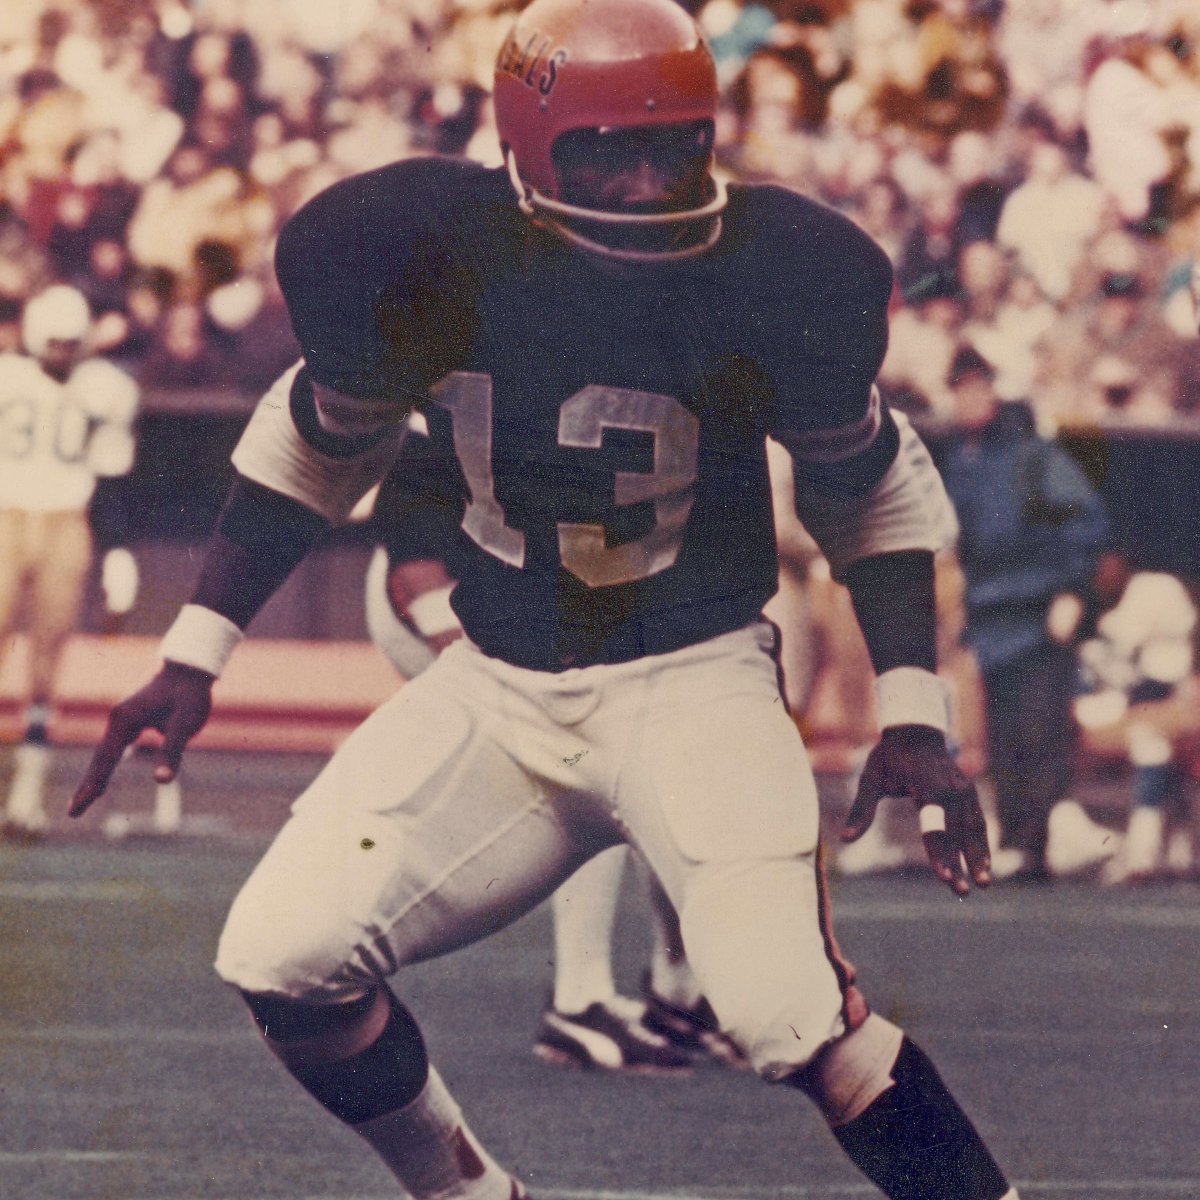 Ken Riley was not one to ever try to call attention to himself. But through years of toil, sweat and excelling on the football field, the @Bengals great is firmly in the spotlight this week. Full Story: profootballhof.me/KenRiley